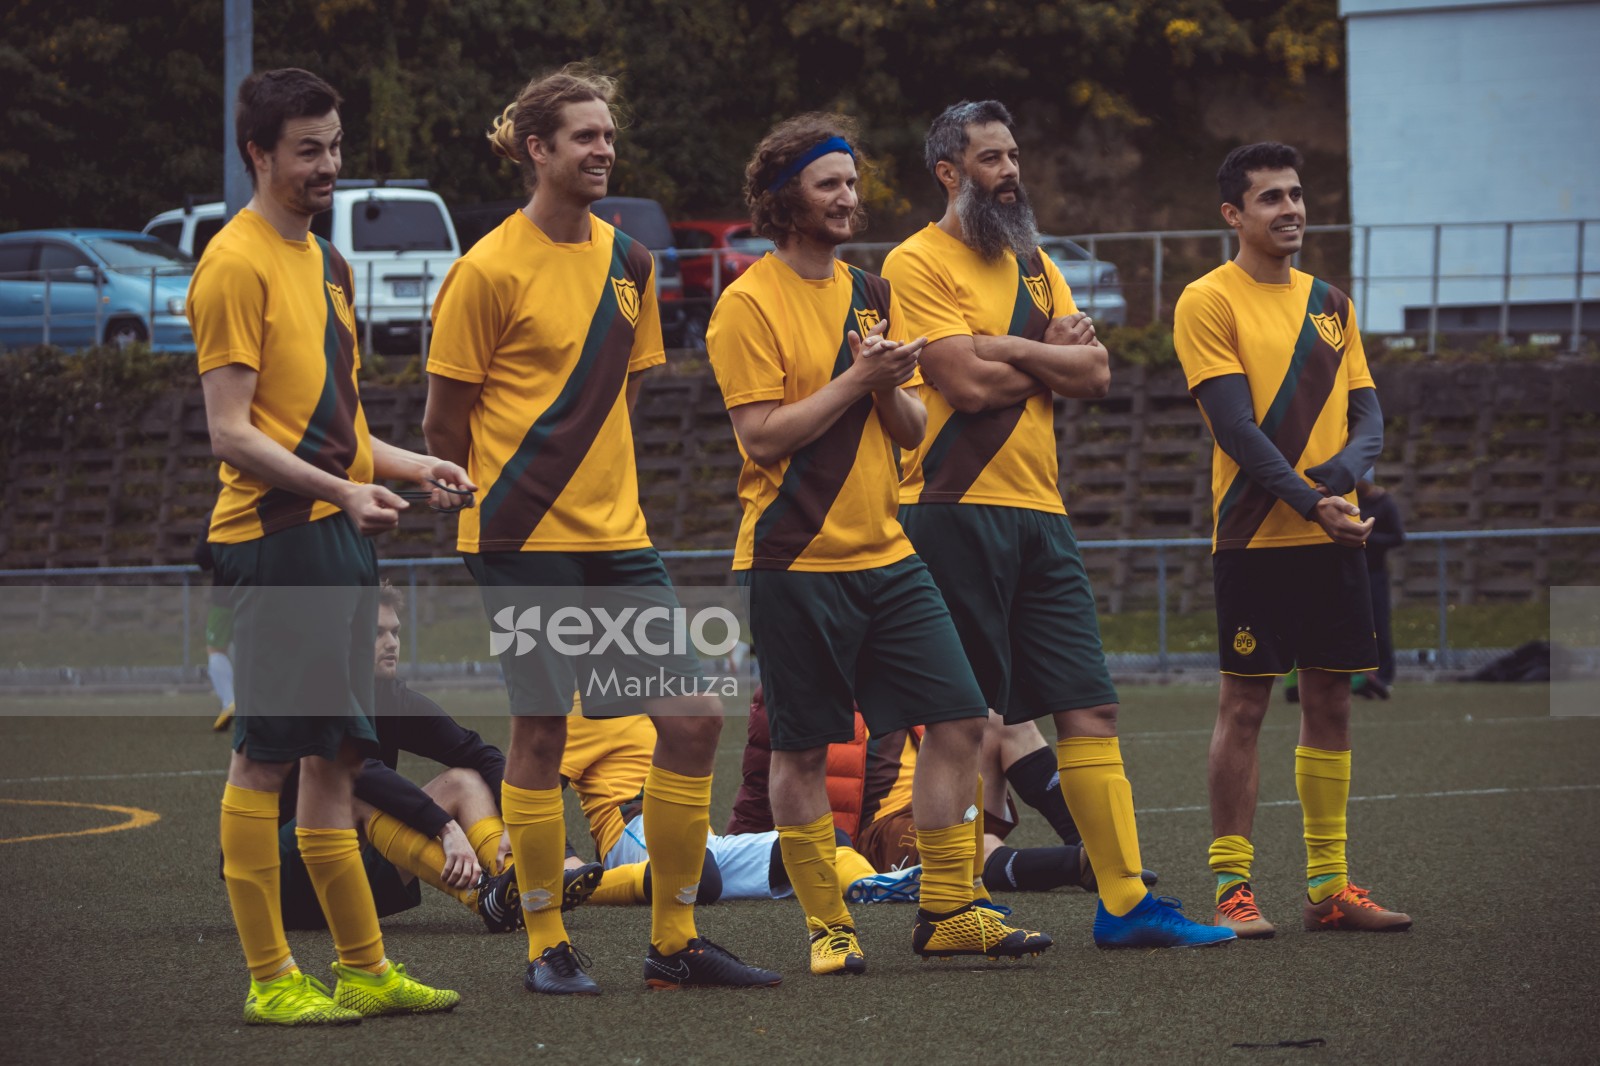 Football players in yellow shirts standing in a queue - Sports Zone sunday league